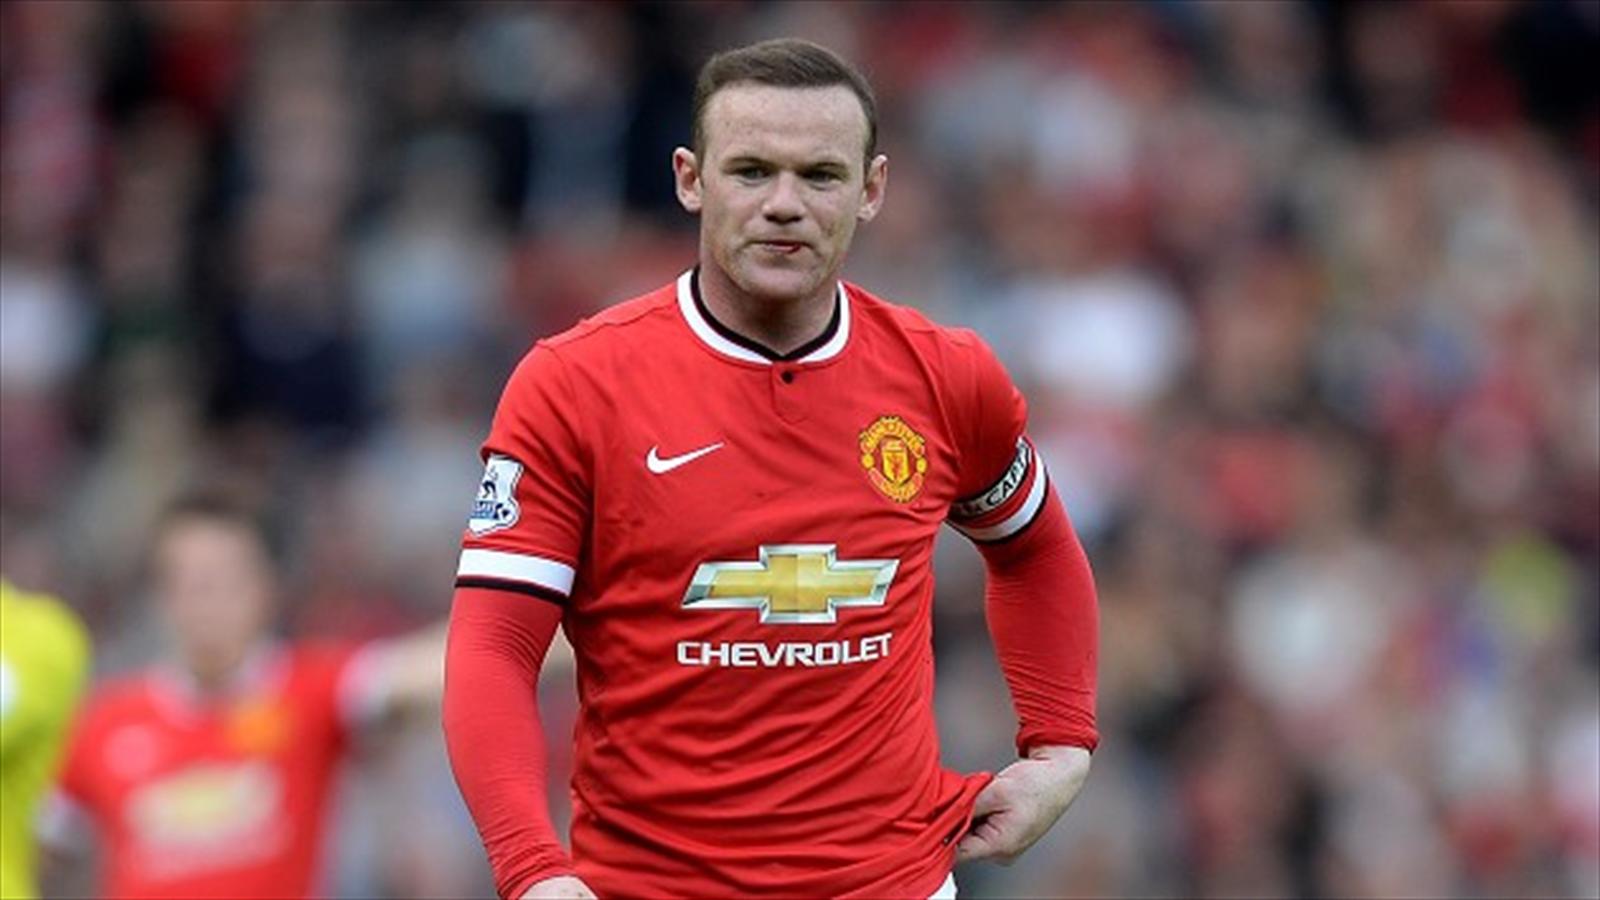 Wayne Rooney is the leading United scorer in Manchester derby history with 11 goals